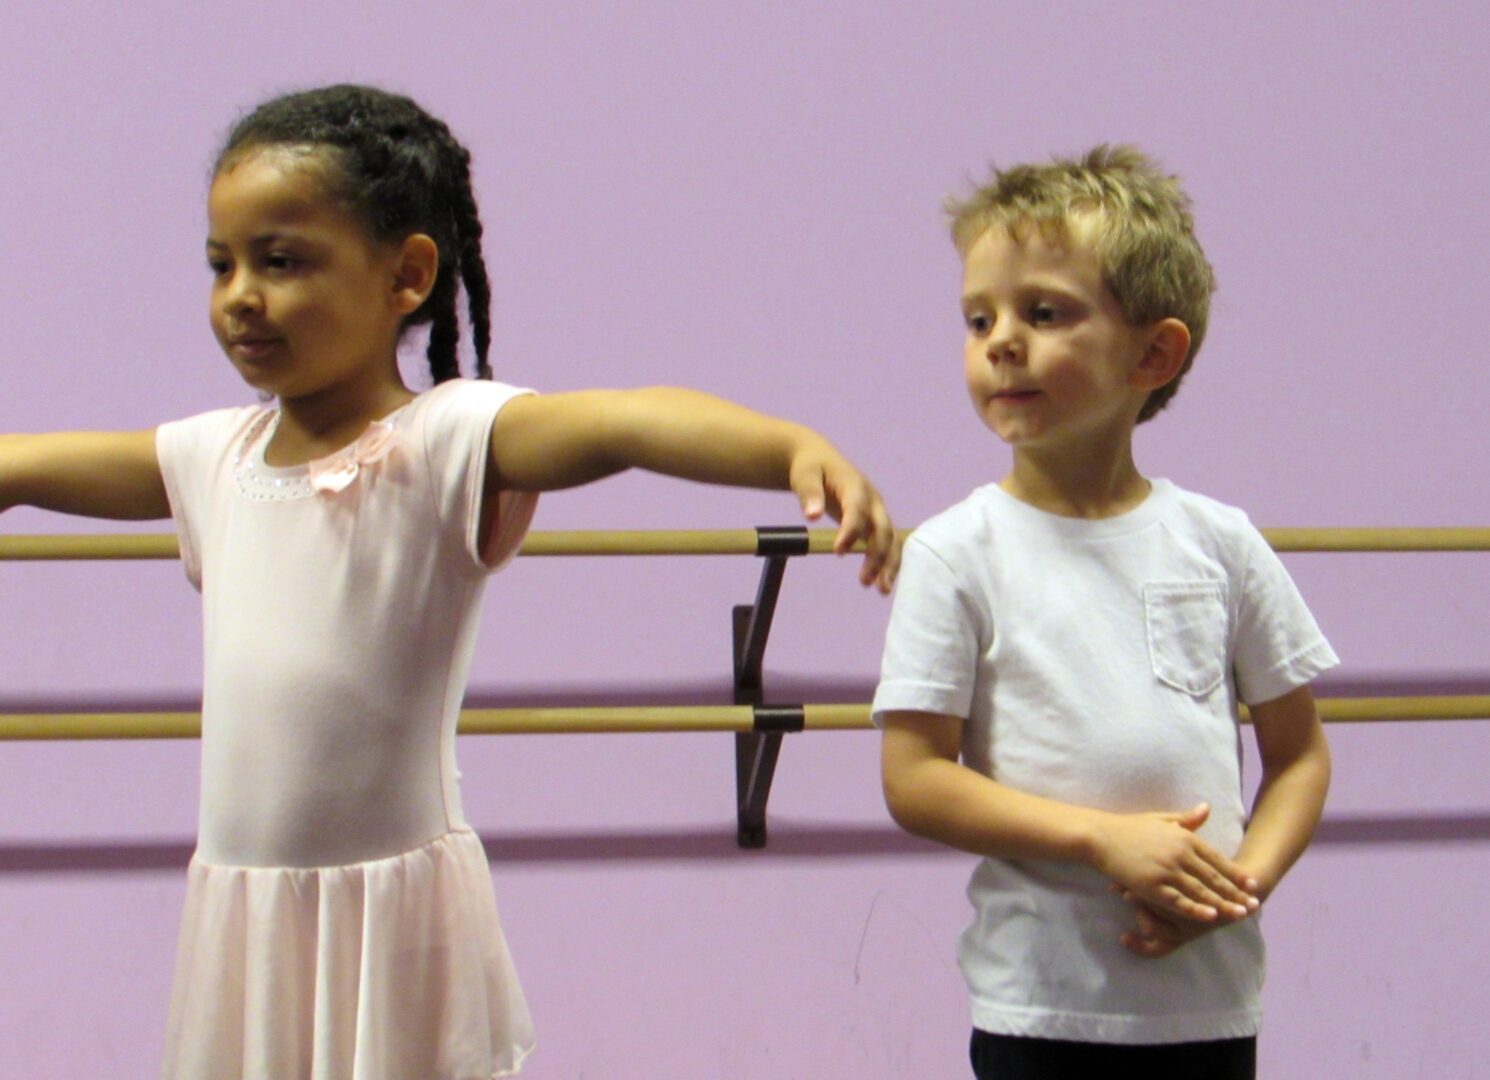 Two young children standing in a ballet class.